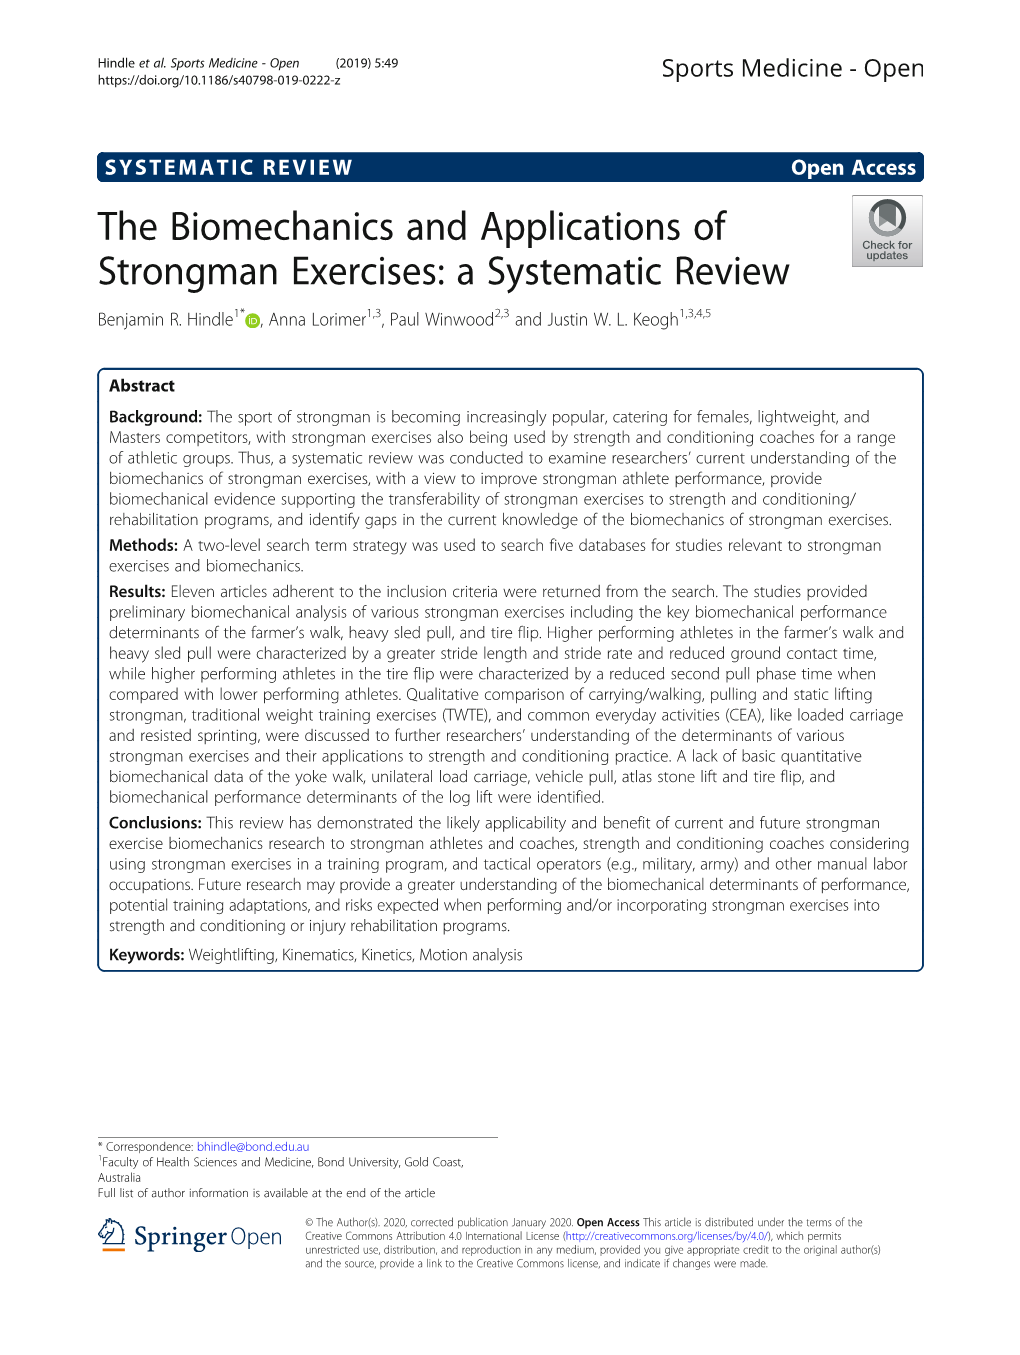 The Biomechanics and Applications of Strongman Exercises: a Systematic Review Benjamin R